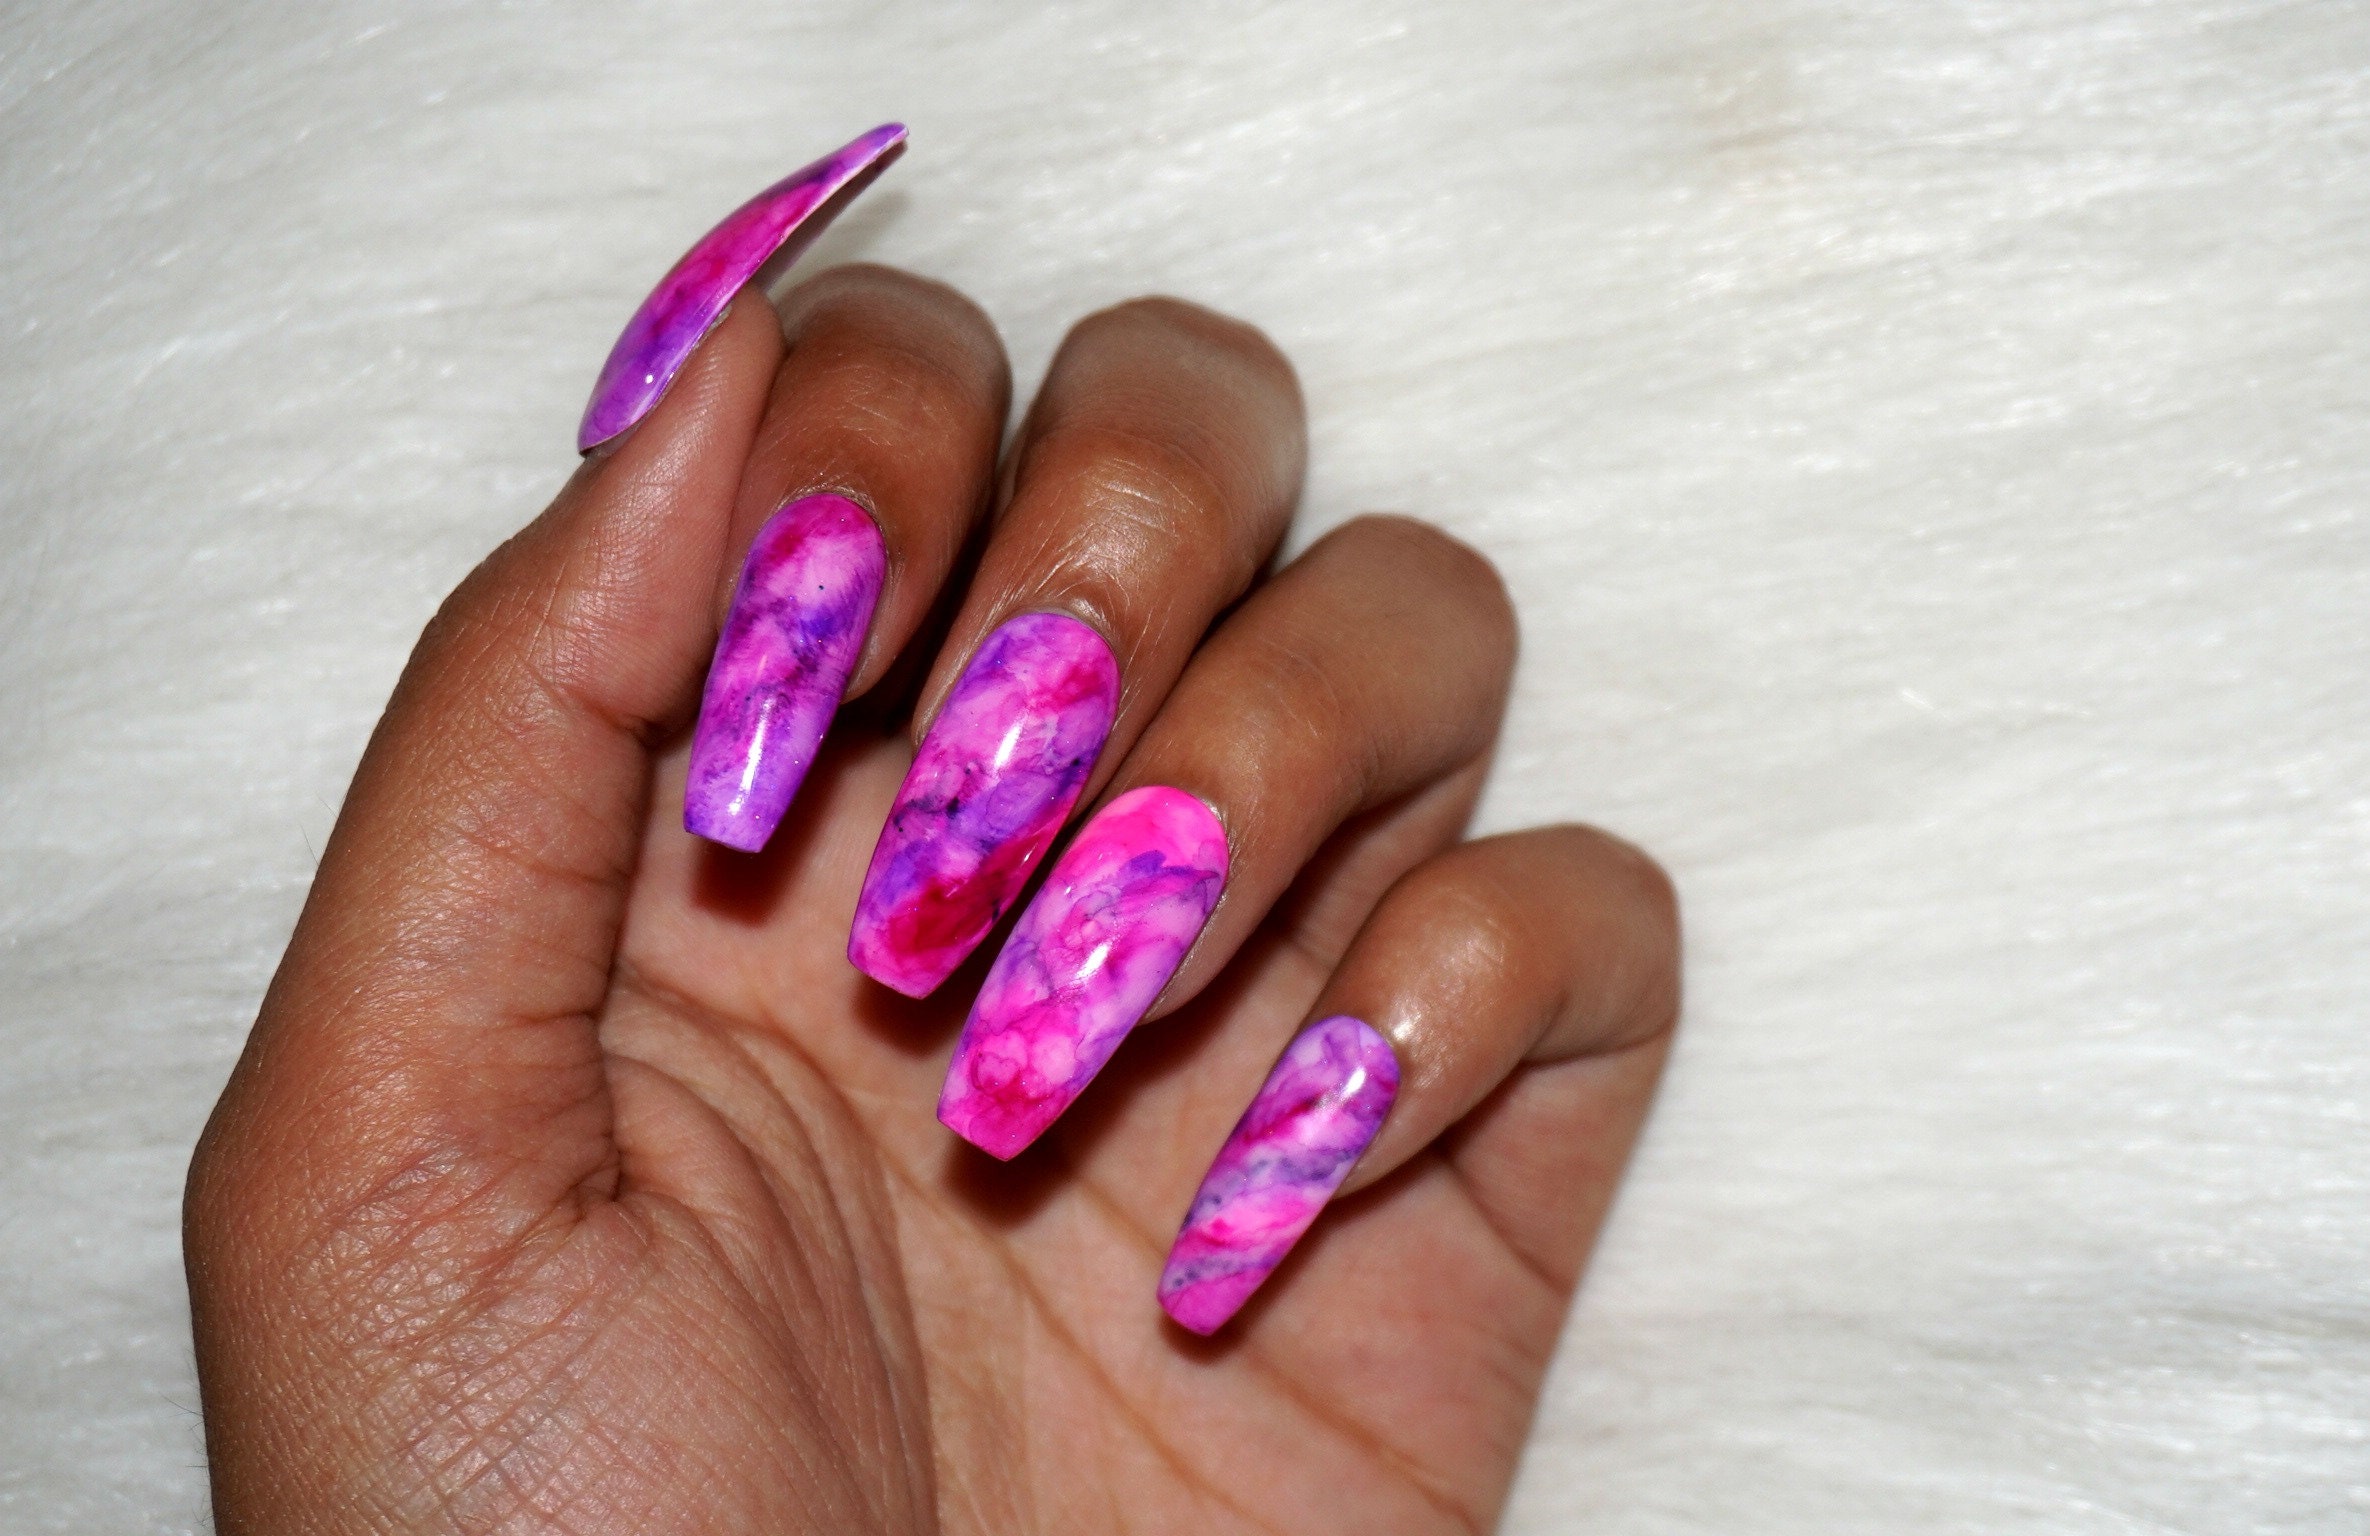 2. Pink and White Marble Nails - wide 2